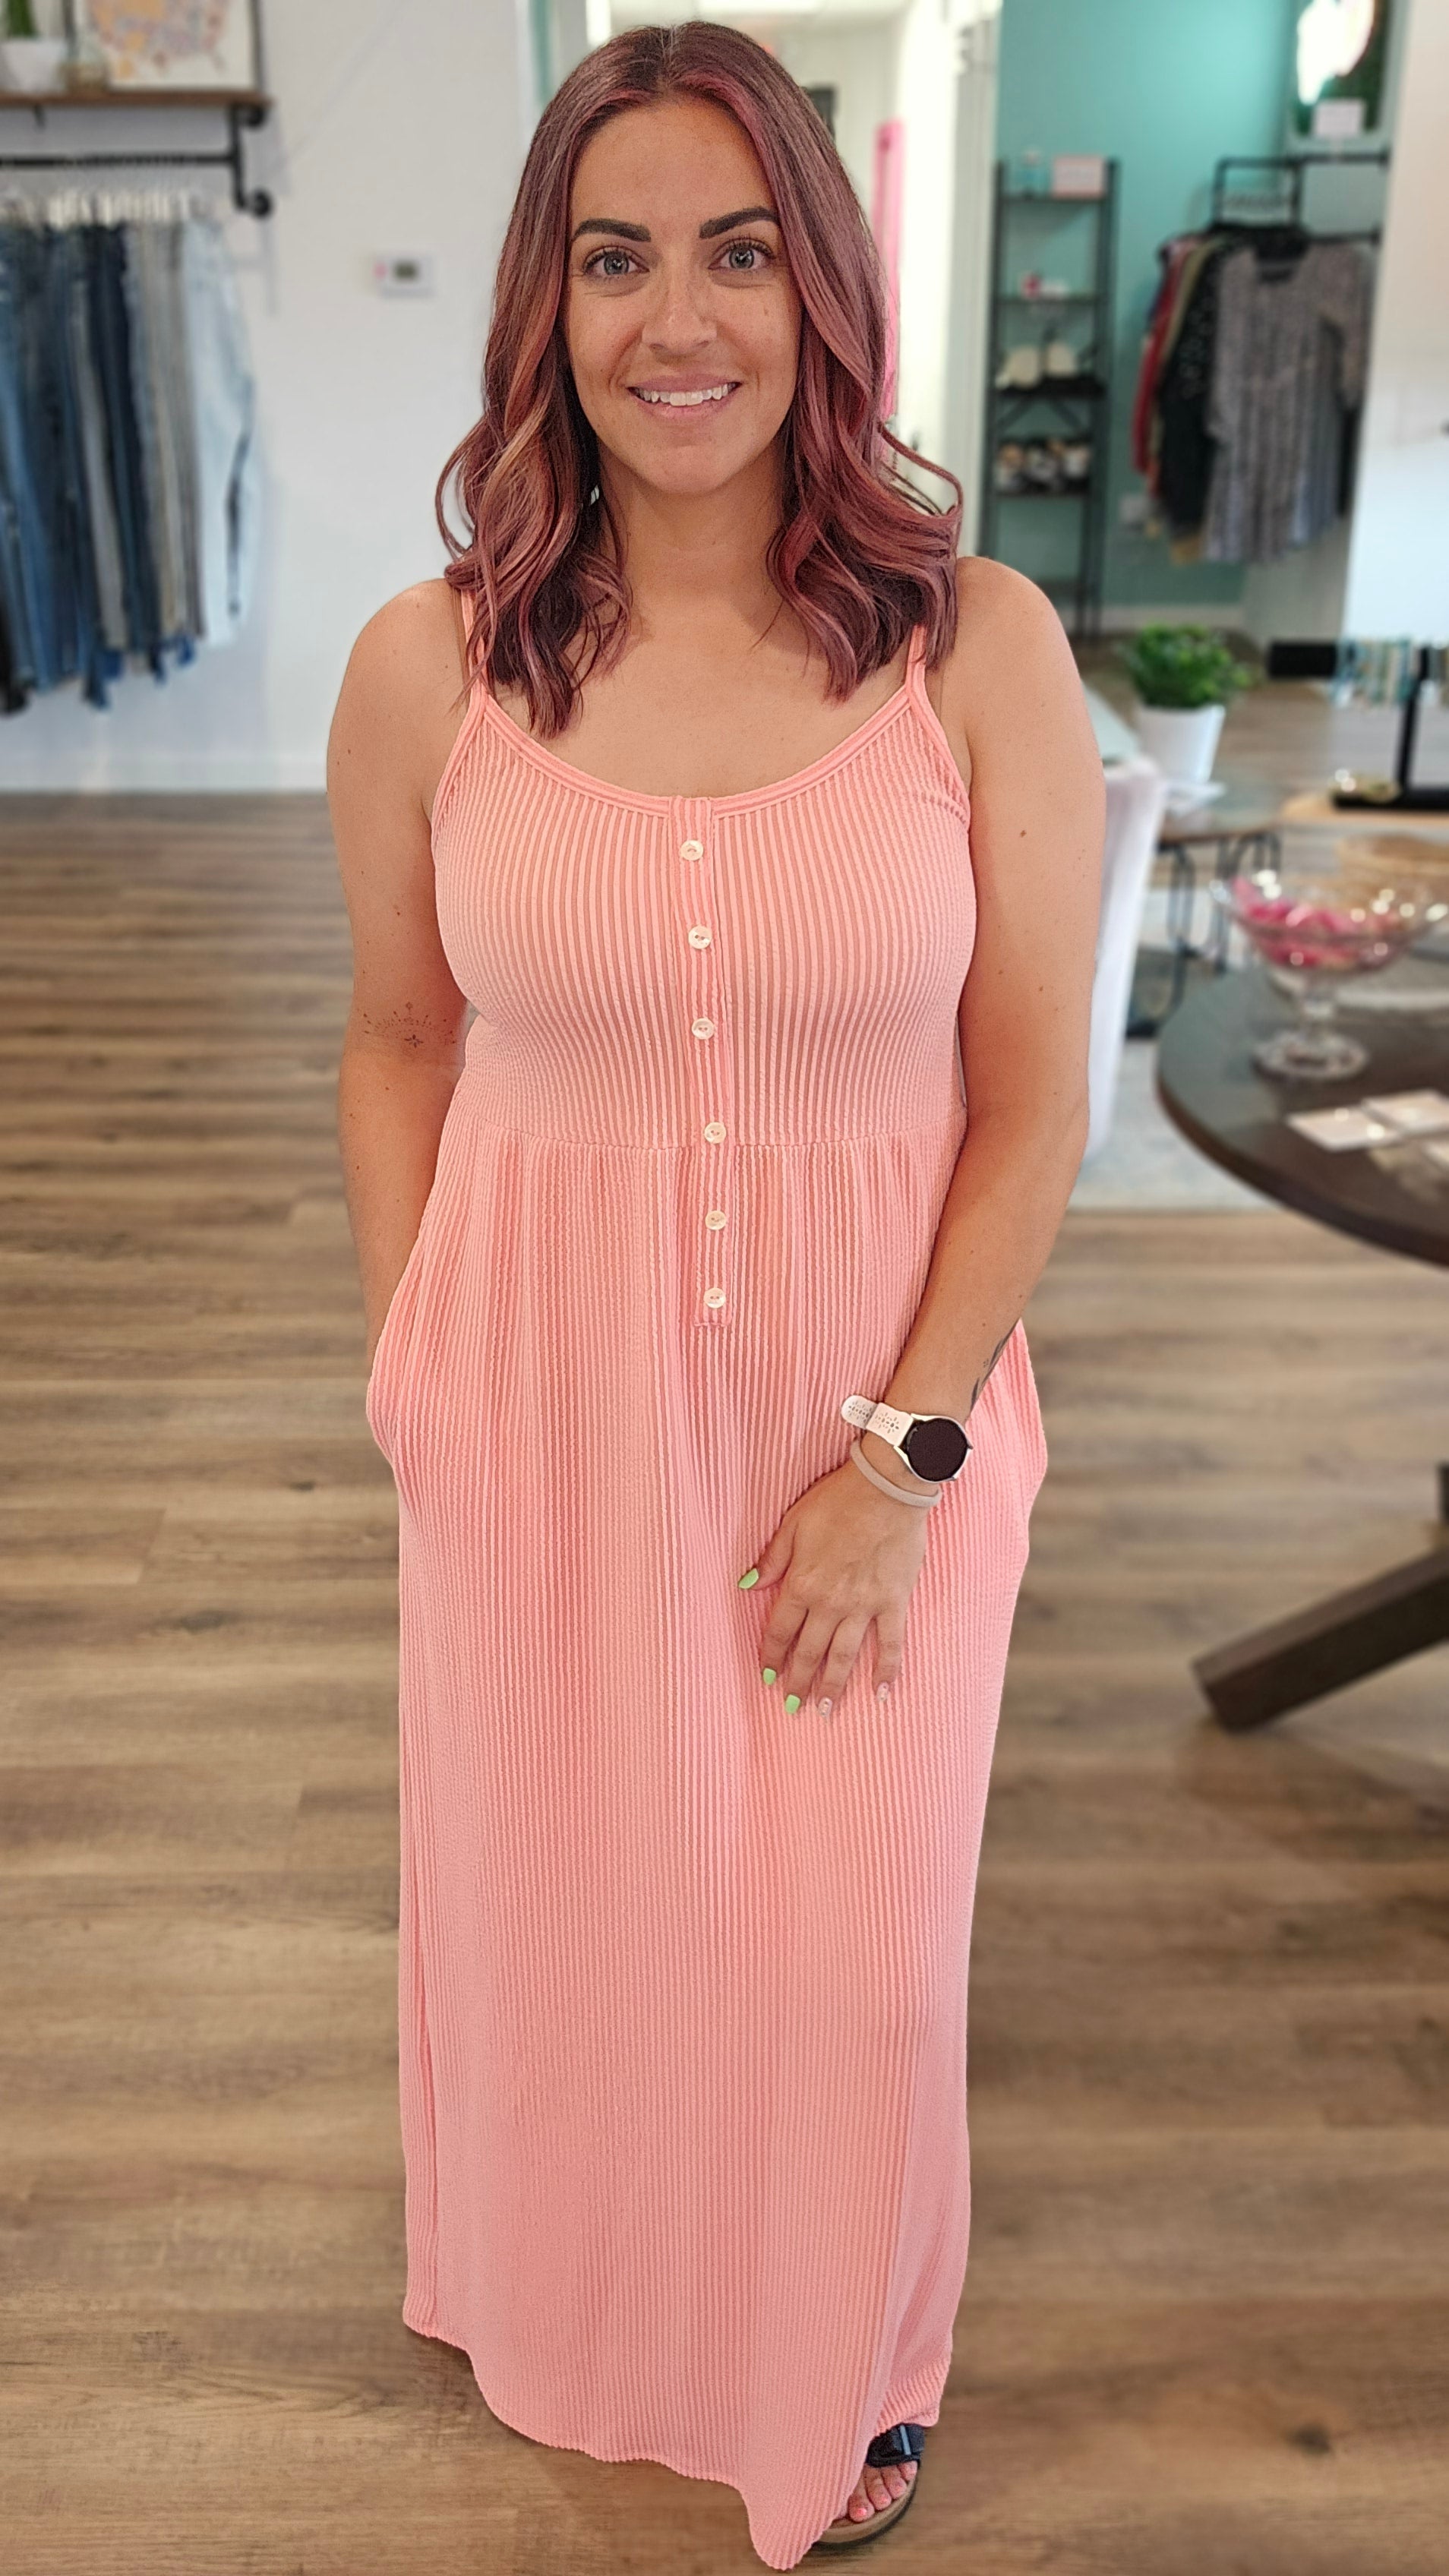 Shop Ribbed Maxi Dress - Peach-Dresses at Ruby Joy Boutique, a Women's Clothing Store in Pickerington, Ohio